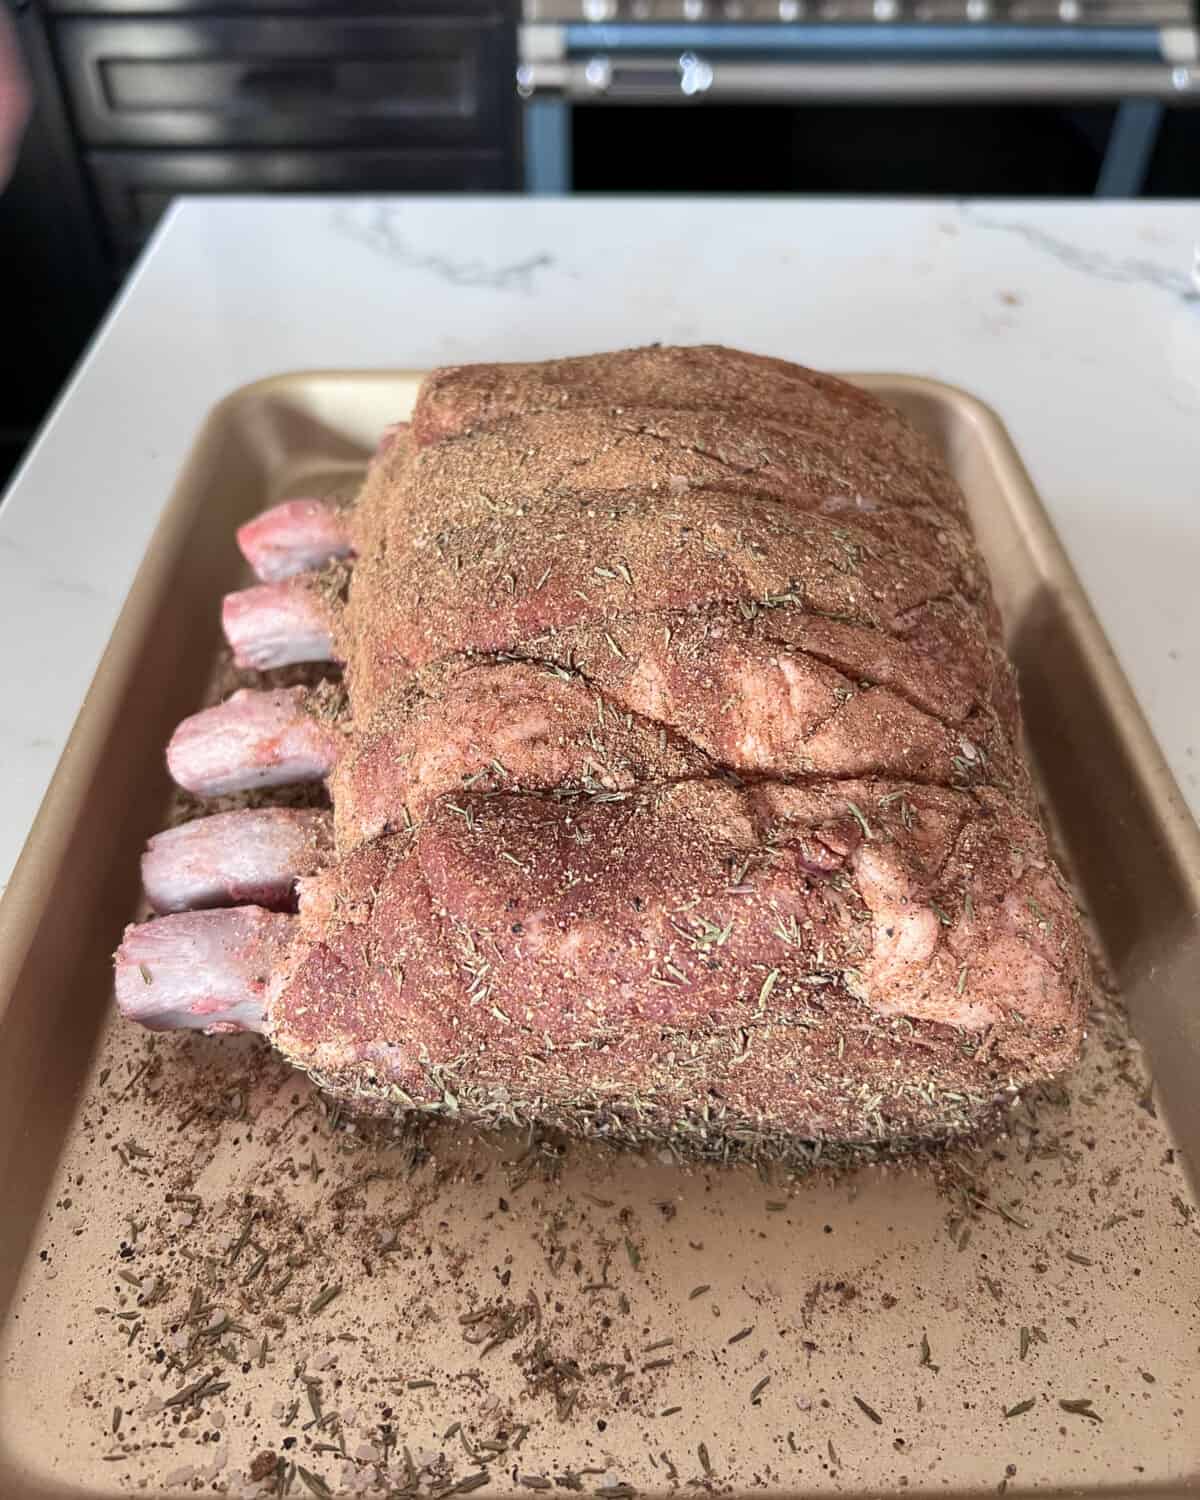 A five bone rack of pork dry rubbed with jerk seasoning in a tray.